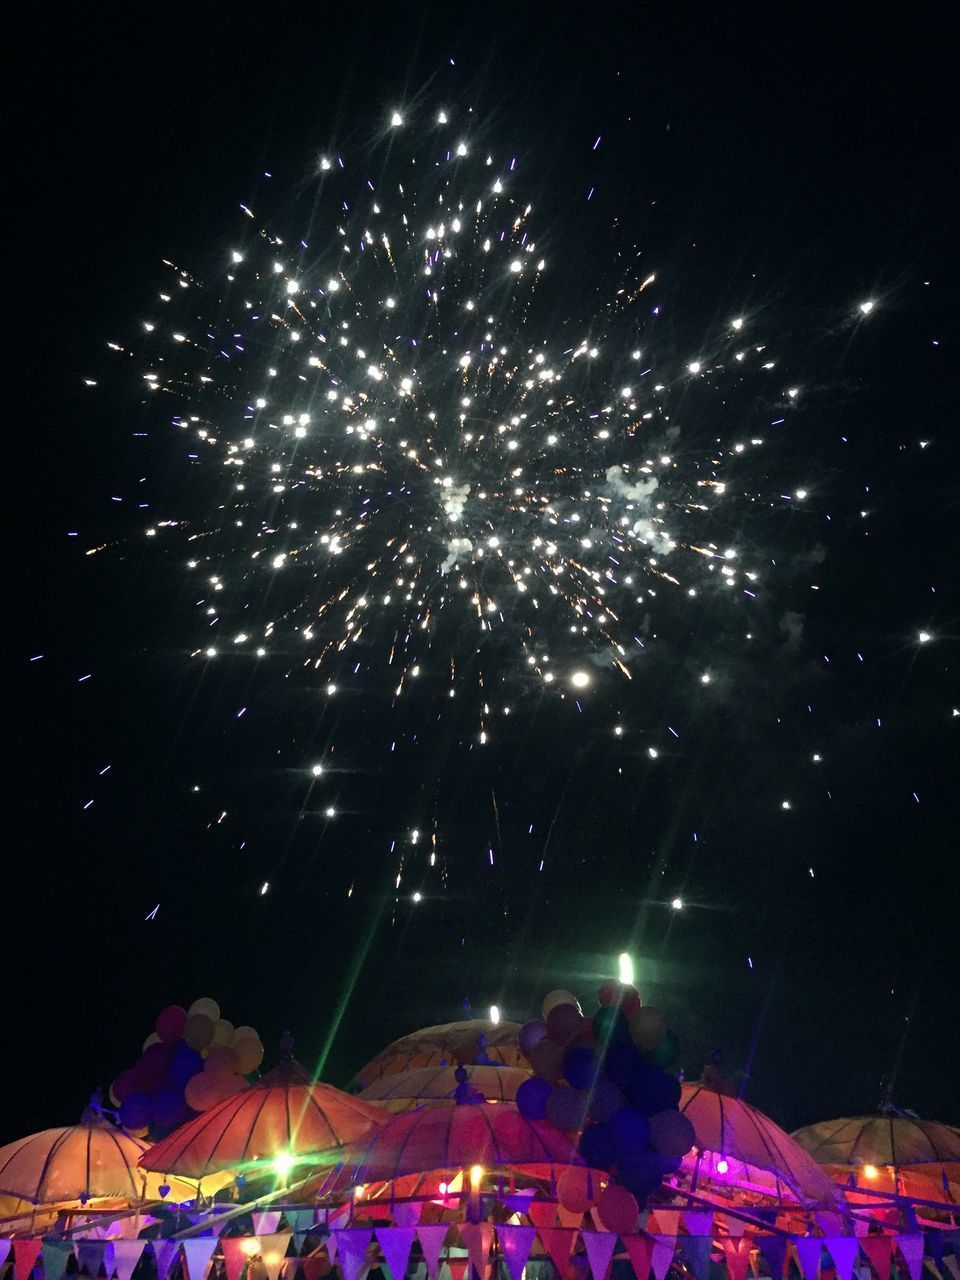 LOW ANGLE VIEW OF FIREWORKS AT NIGHT